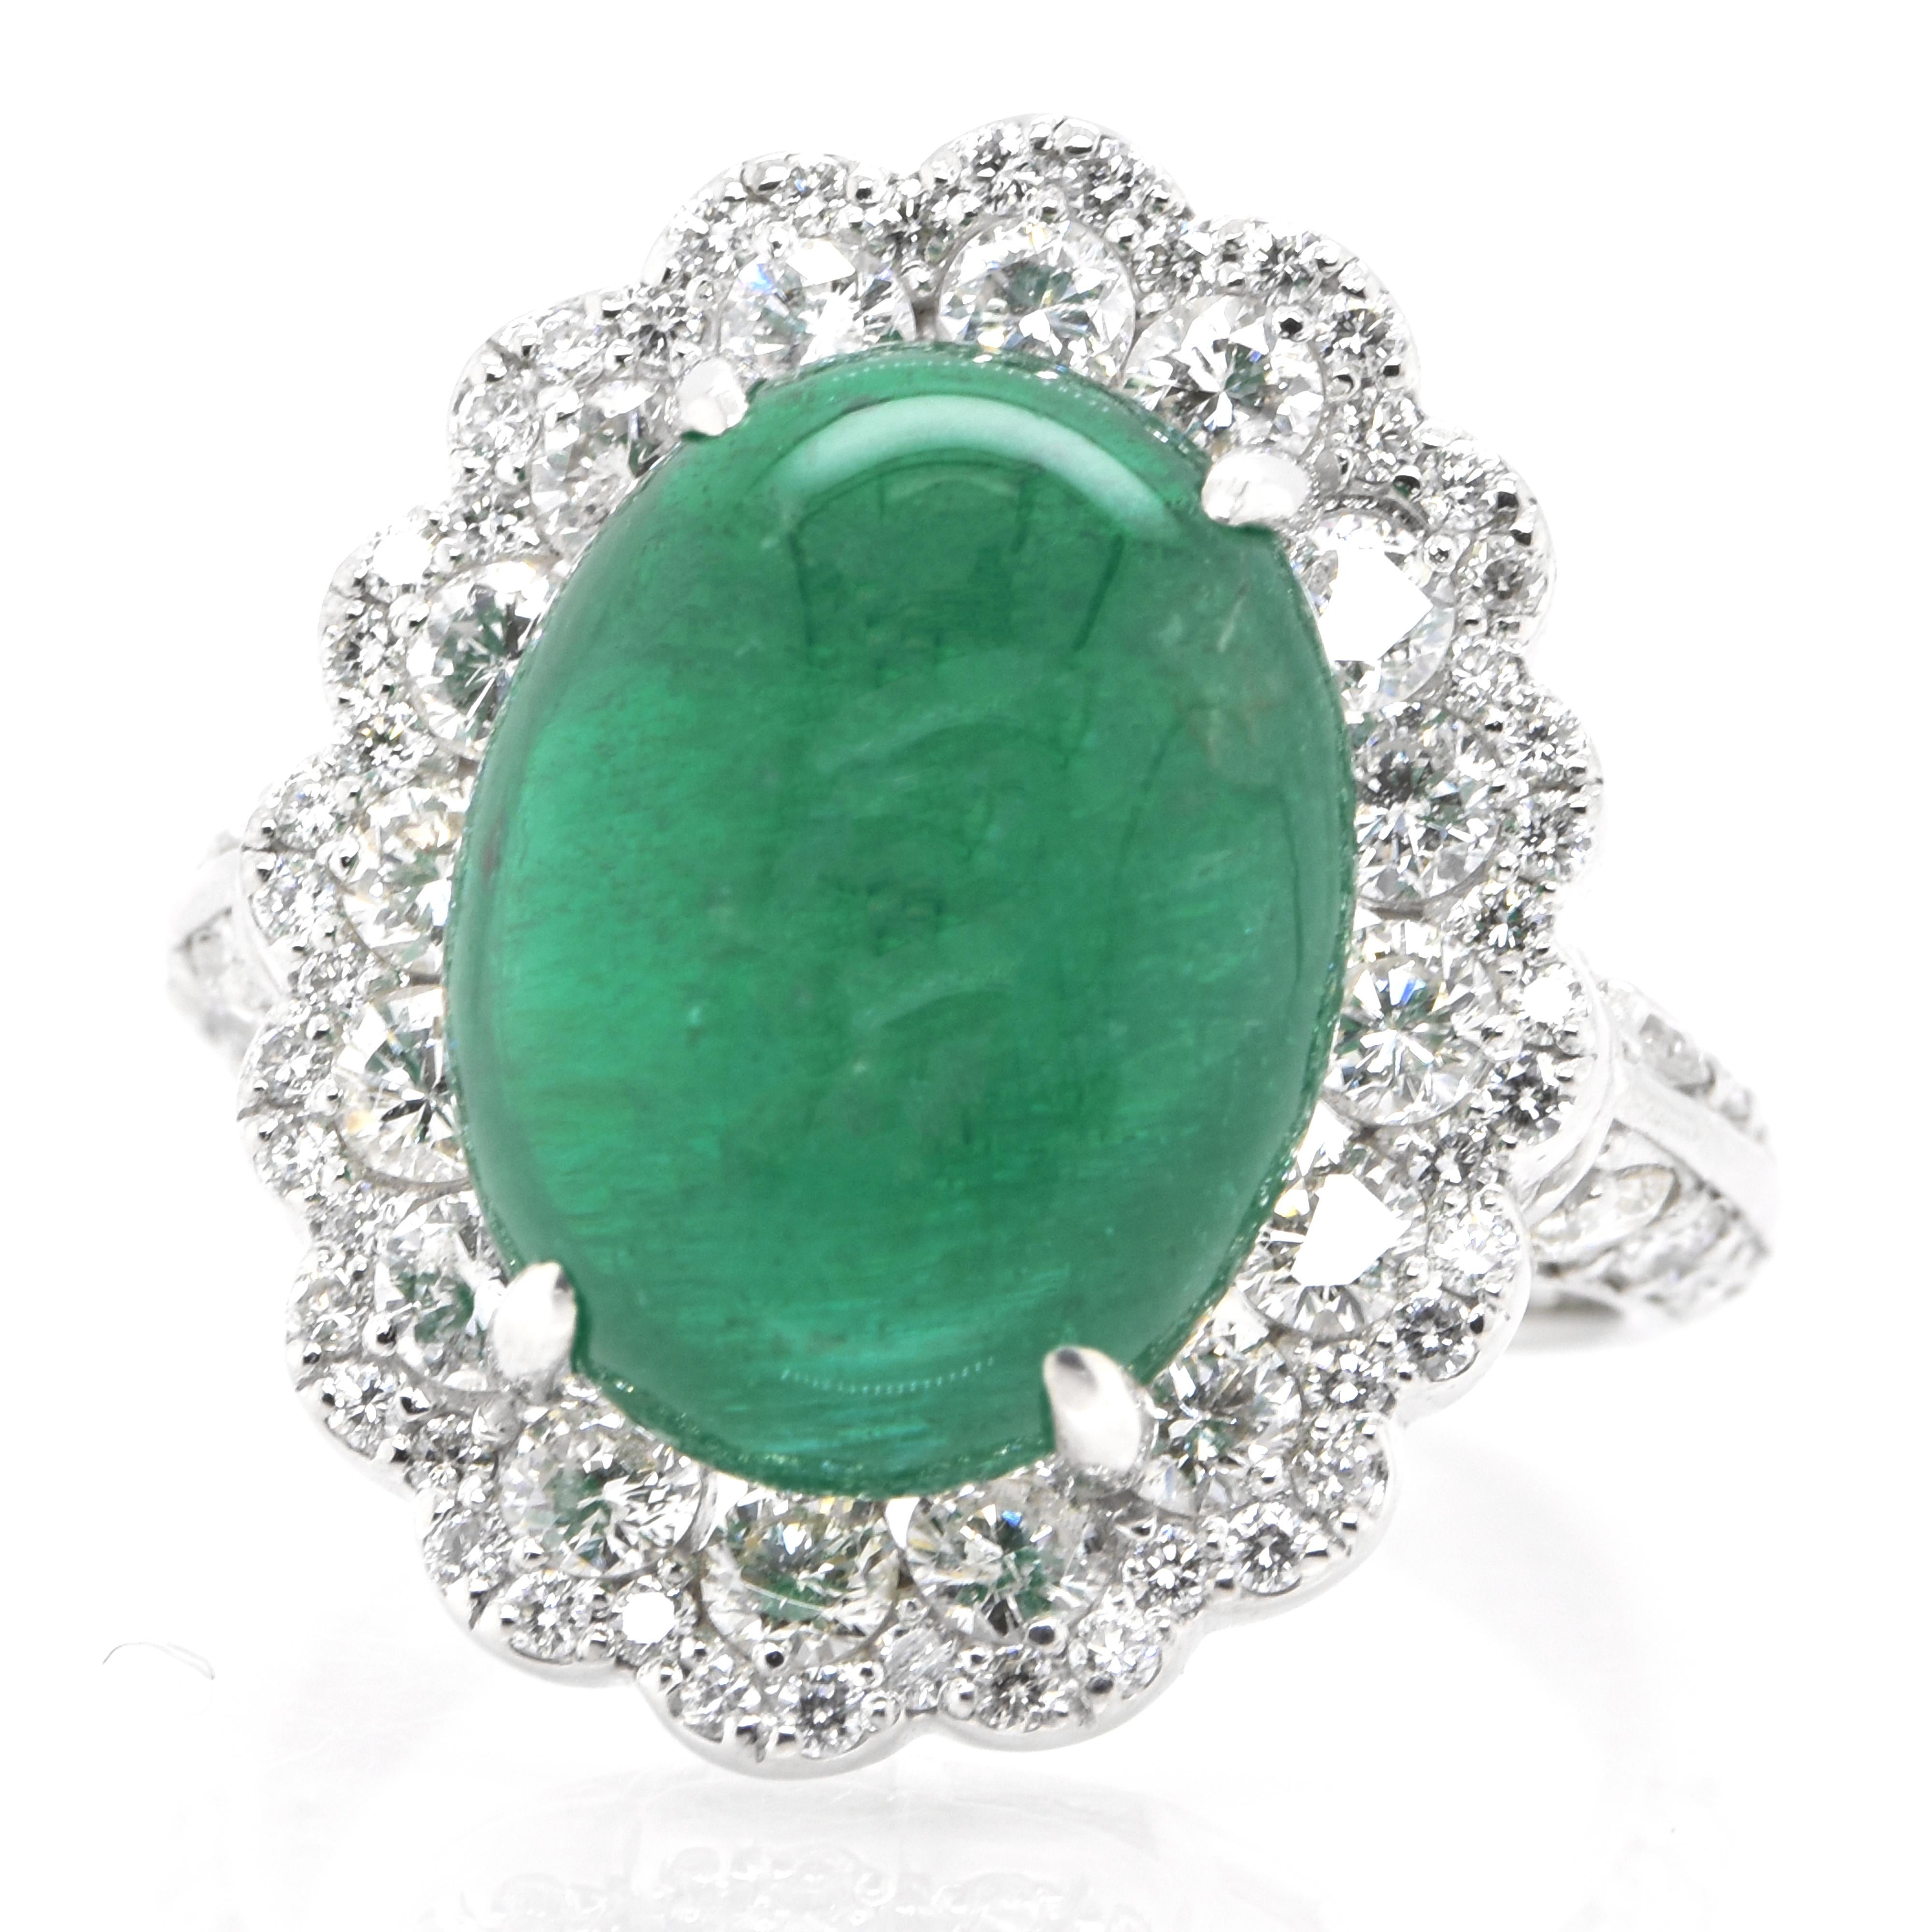 A stunning ring featuring a 8.18 Carat Natural Zambian Emerald Cabochon and 1.50 Carats of Diamond Accents set in Platinum. People have admired emerald’s green for thousands of years. Emeralds have always been associated with the lushest landscapes